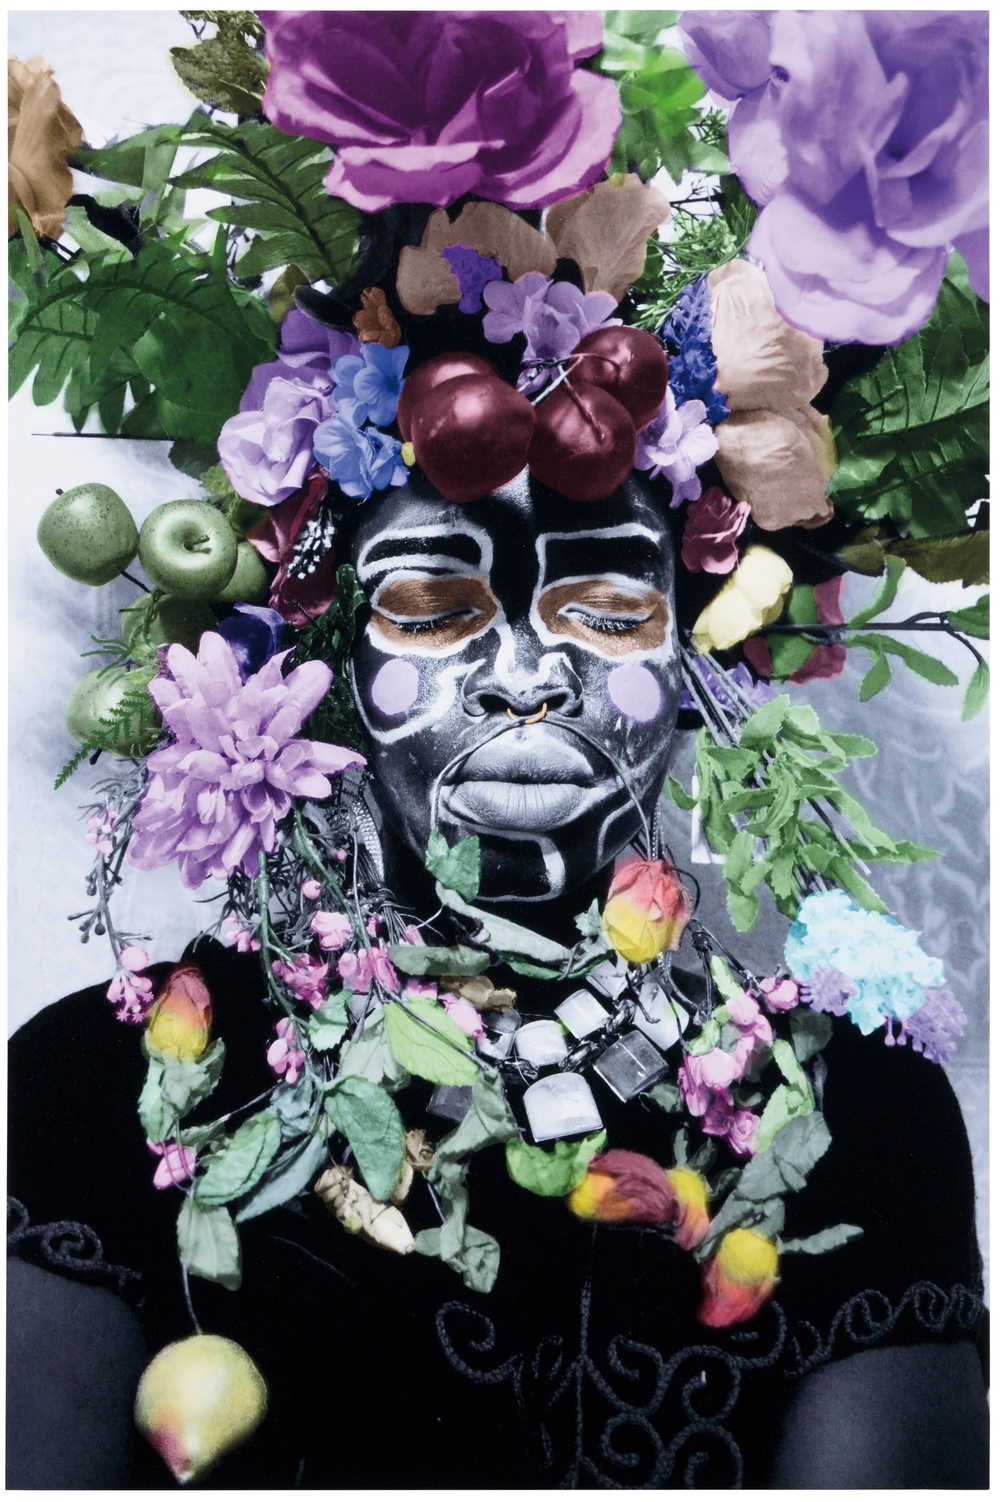 Photographic collage of person with black and white designs painted on their face with a head surrounded by flowers and fruit in a decorative fashion.